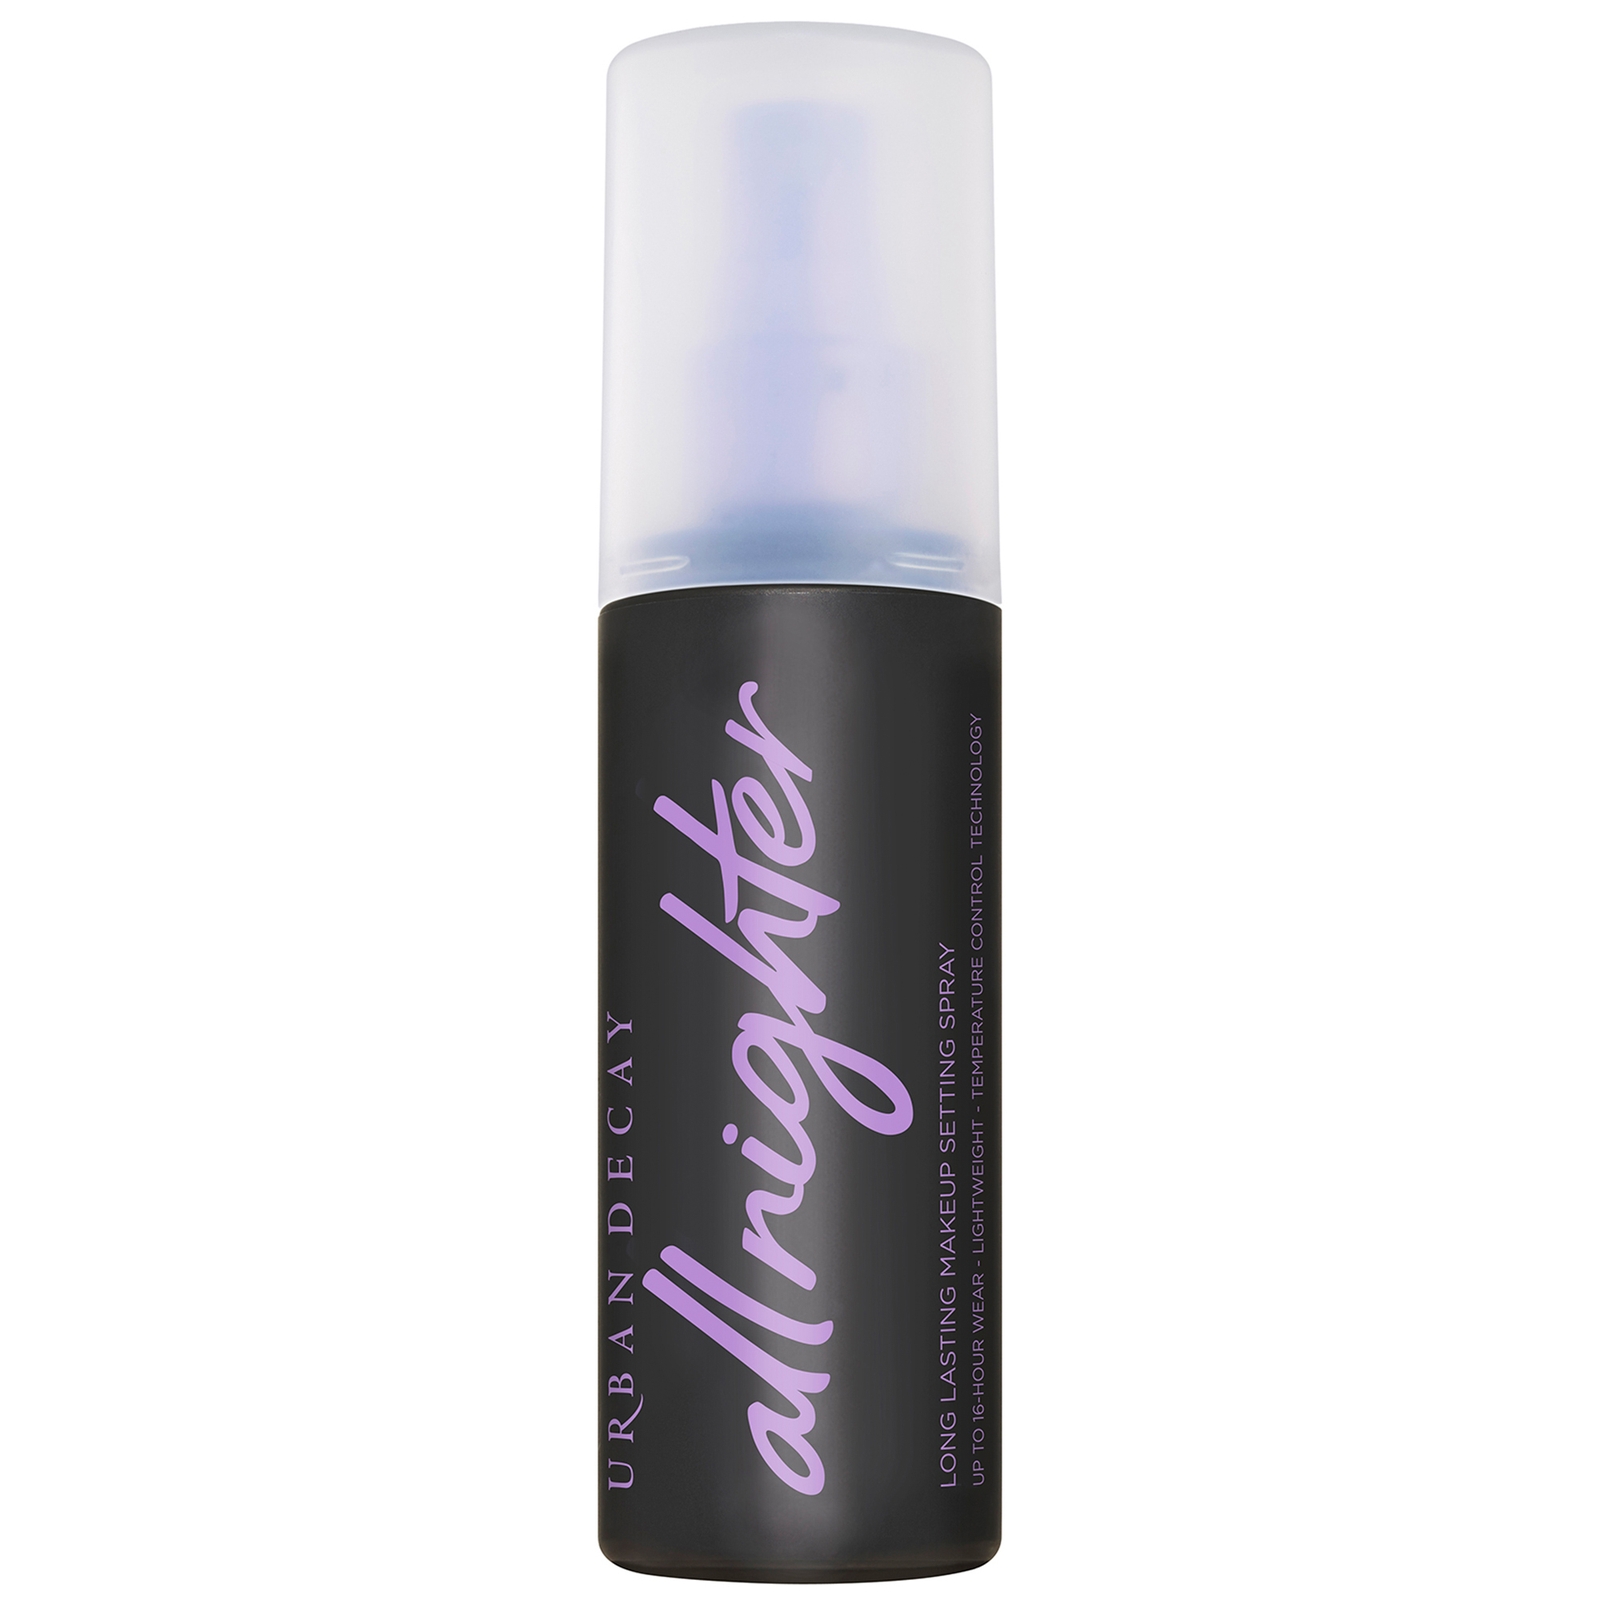 Image of Urban Decay All Nighter Setting Spray 118ml